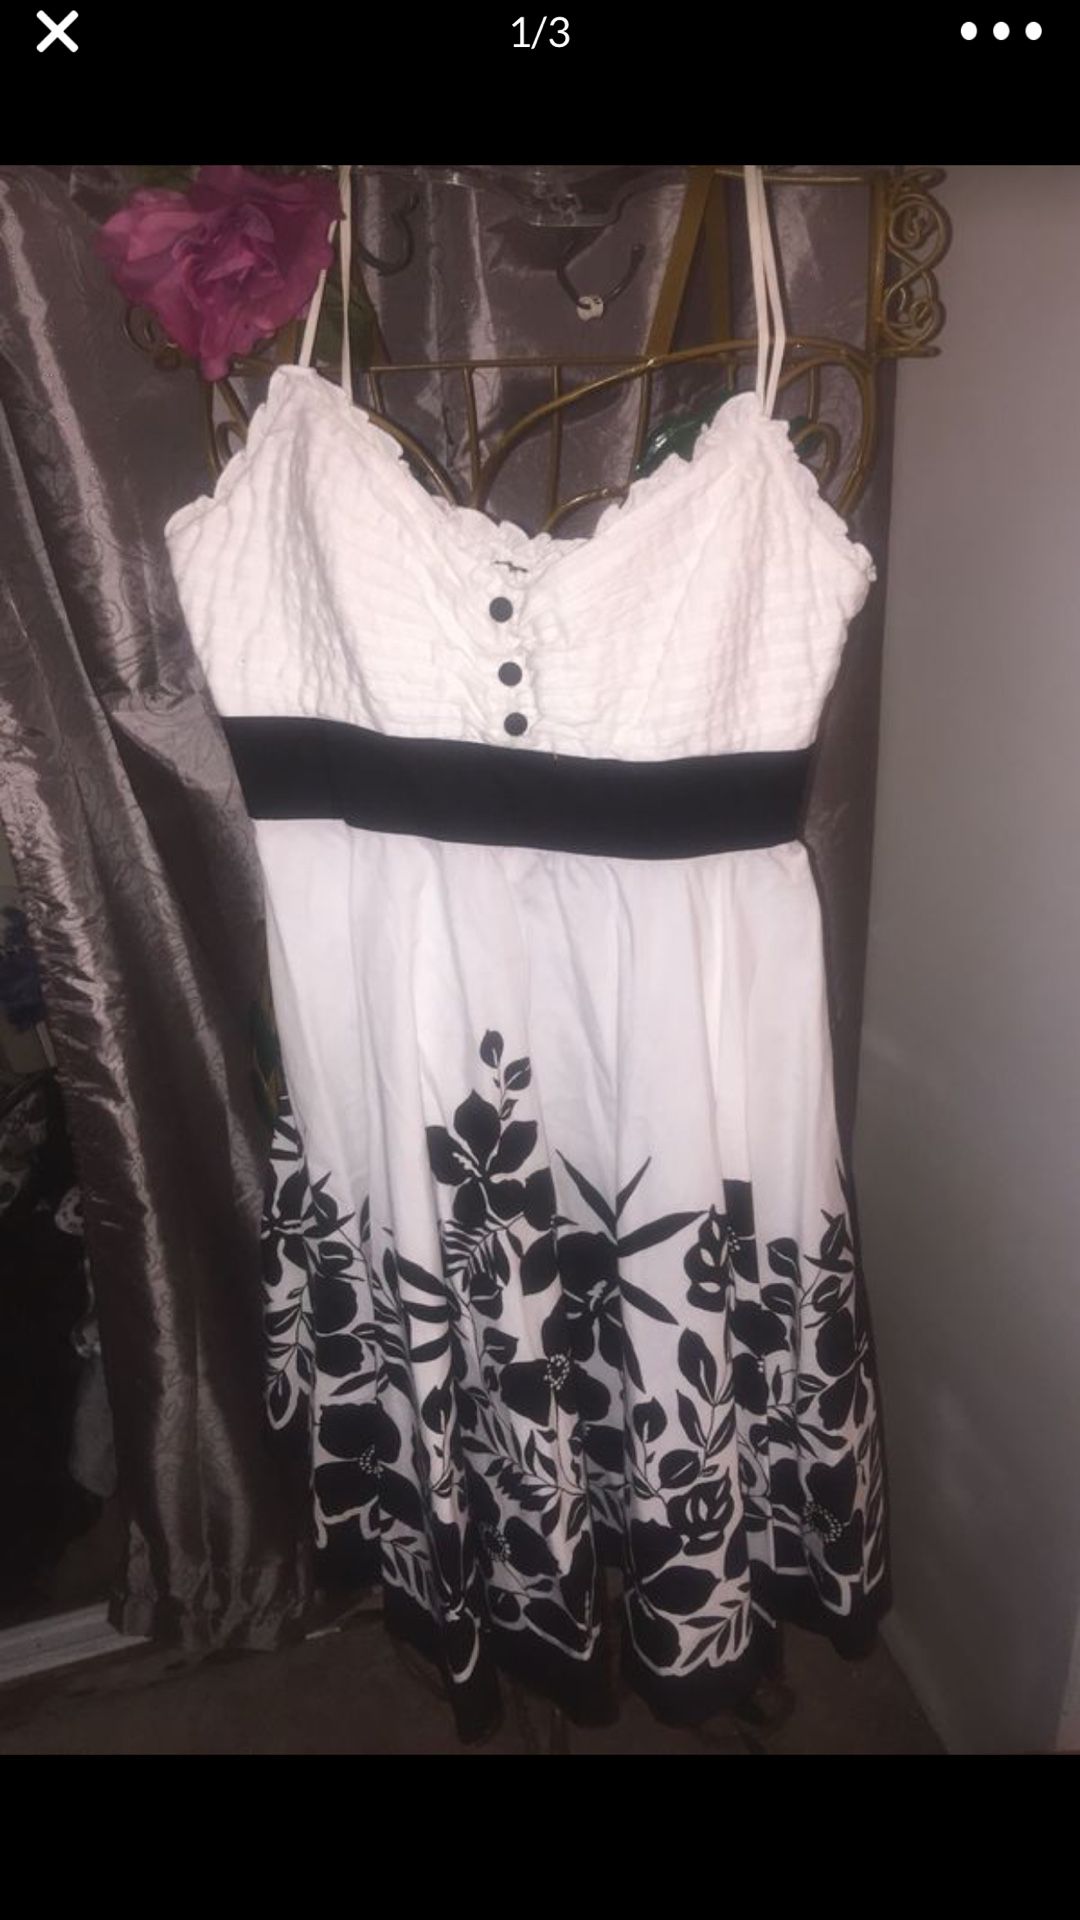 Misses cotton dress white with black flowers zip back size med 10 pristine